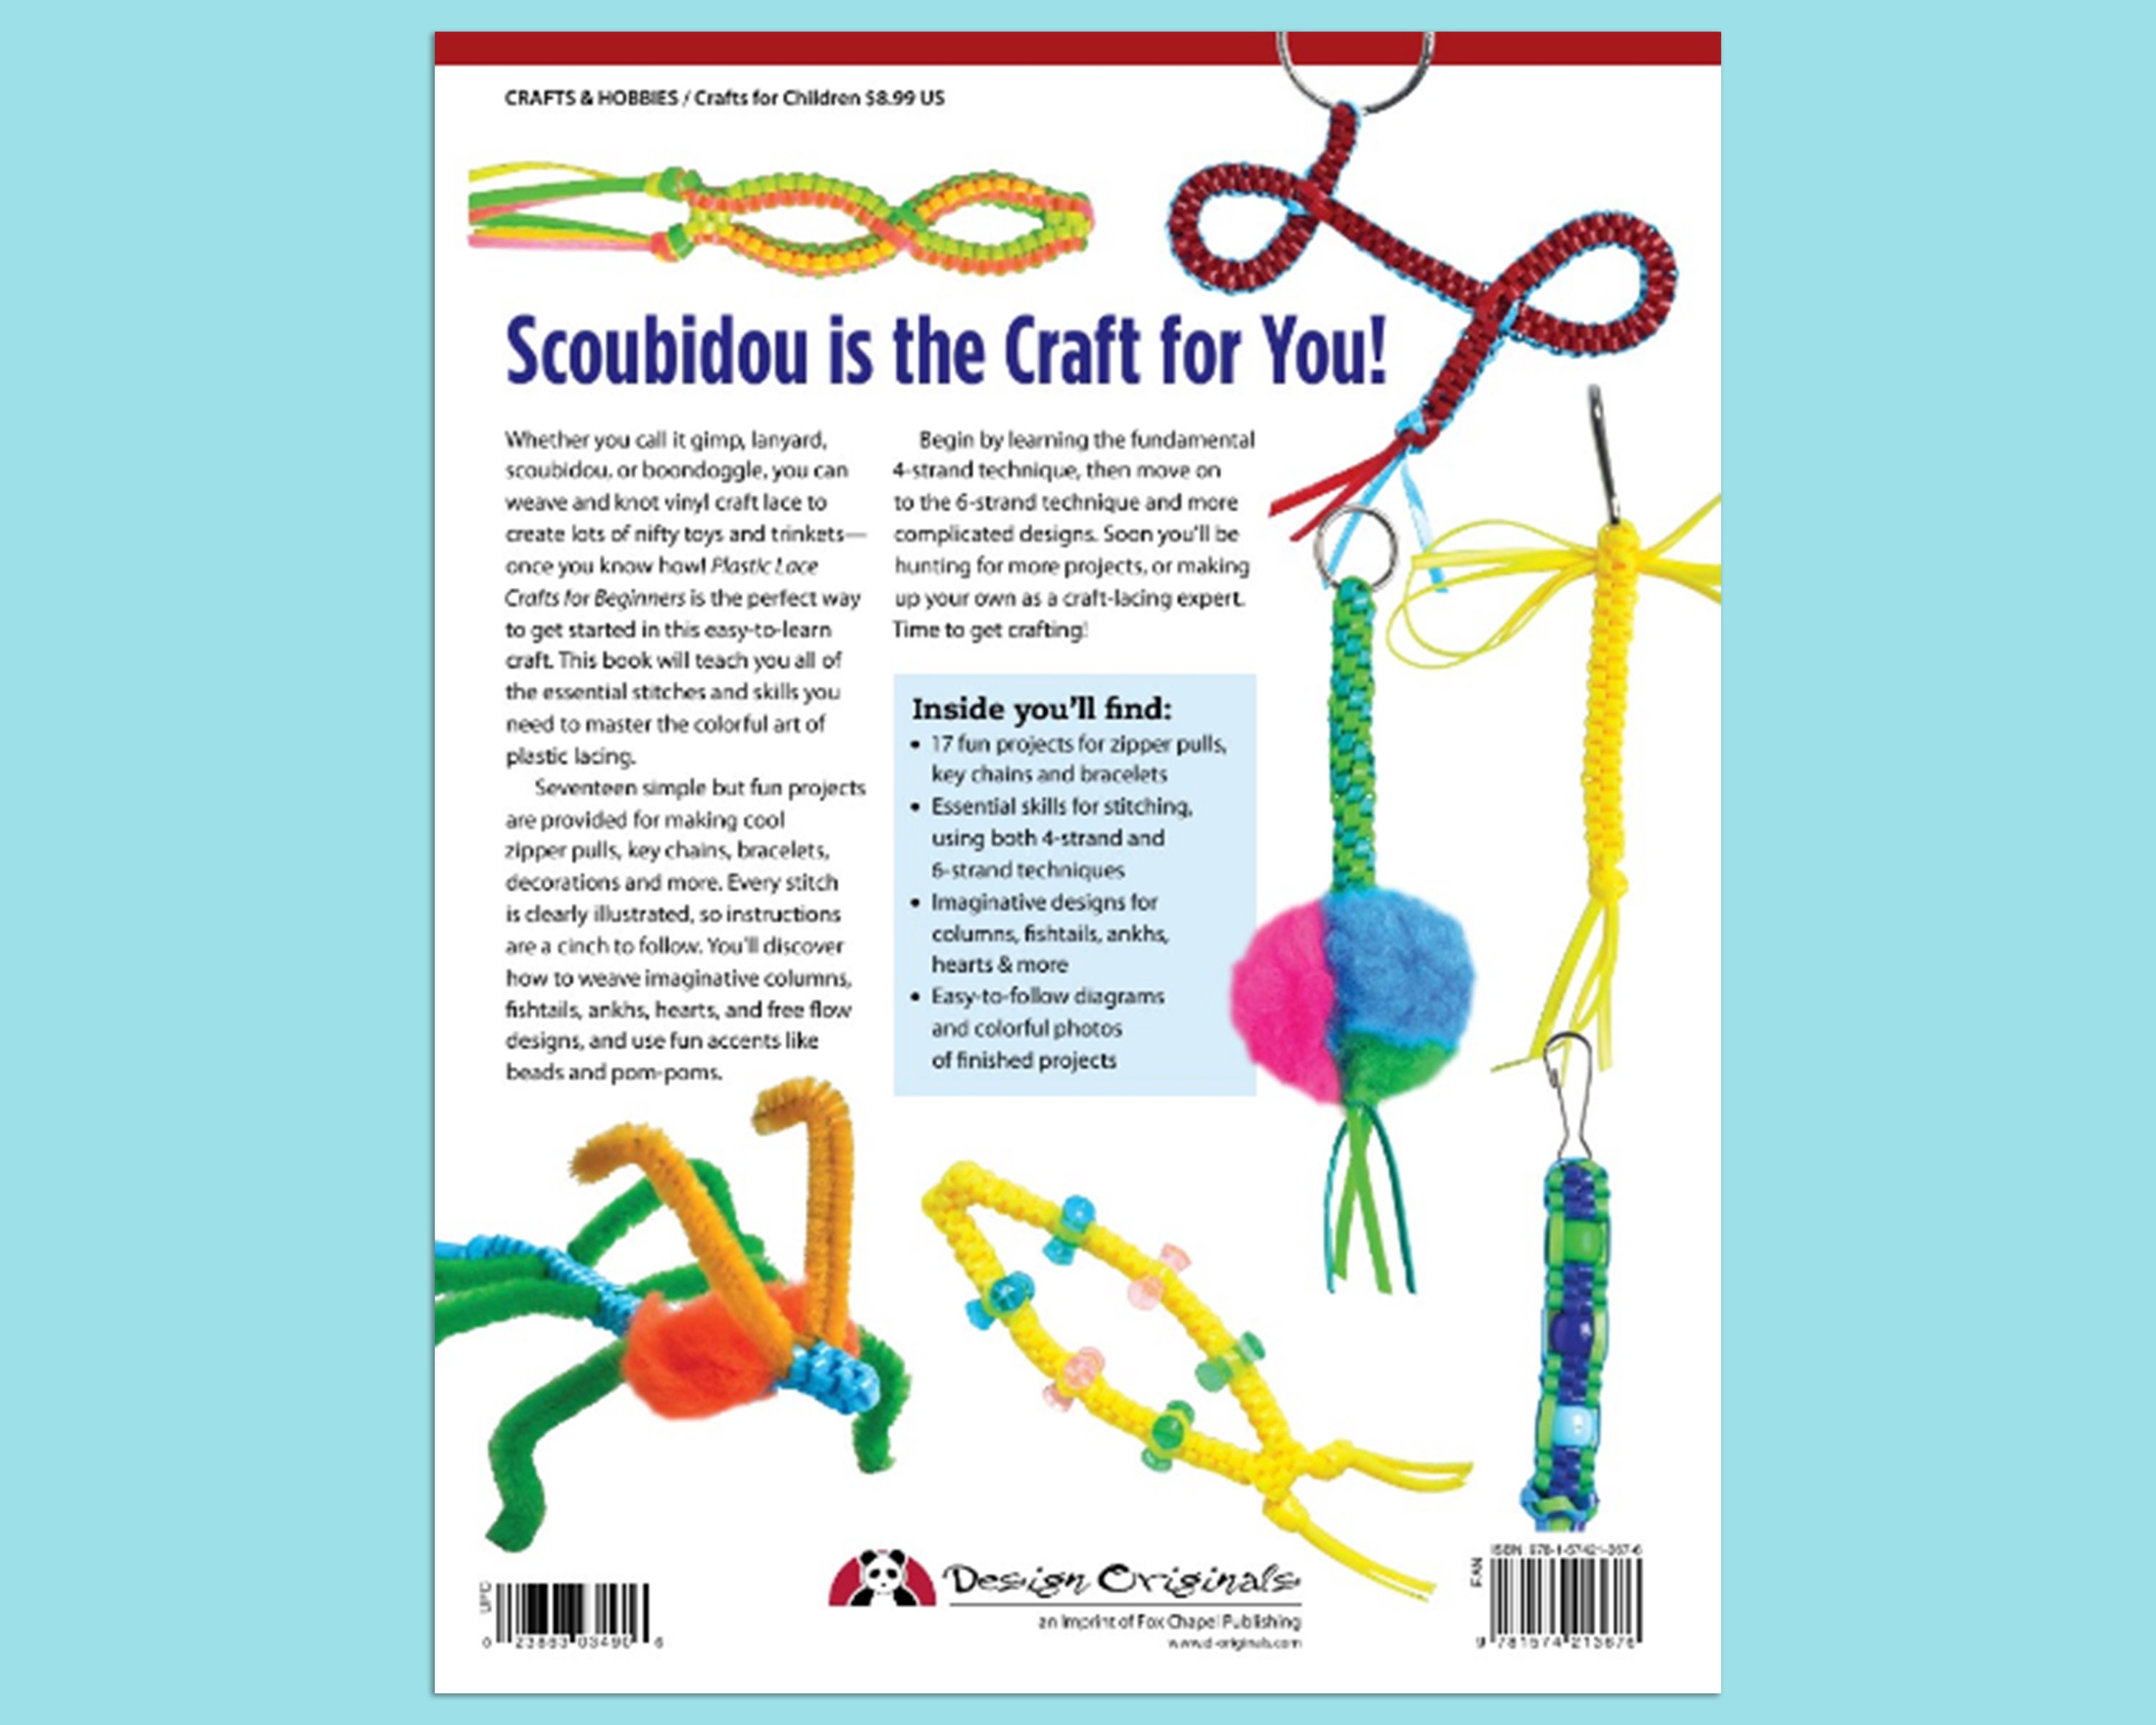 Book: Plastic Lace Crafts Book Scoubidou Gimp Cord Projects Kids Craft  Projects Vinyl String Patterns 